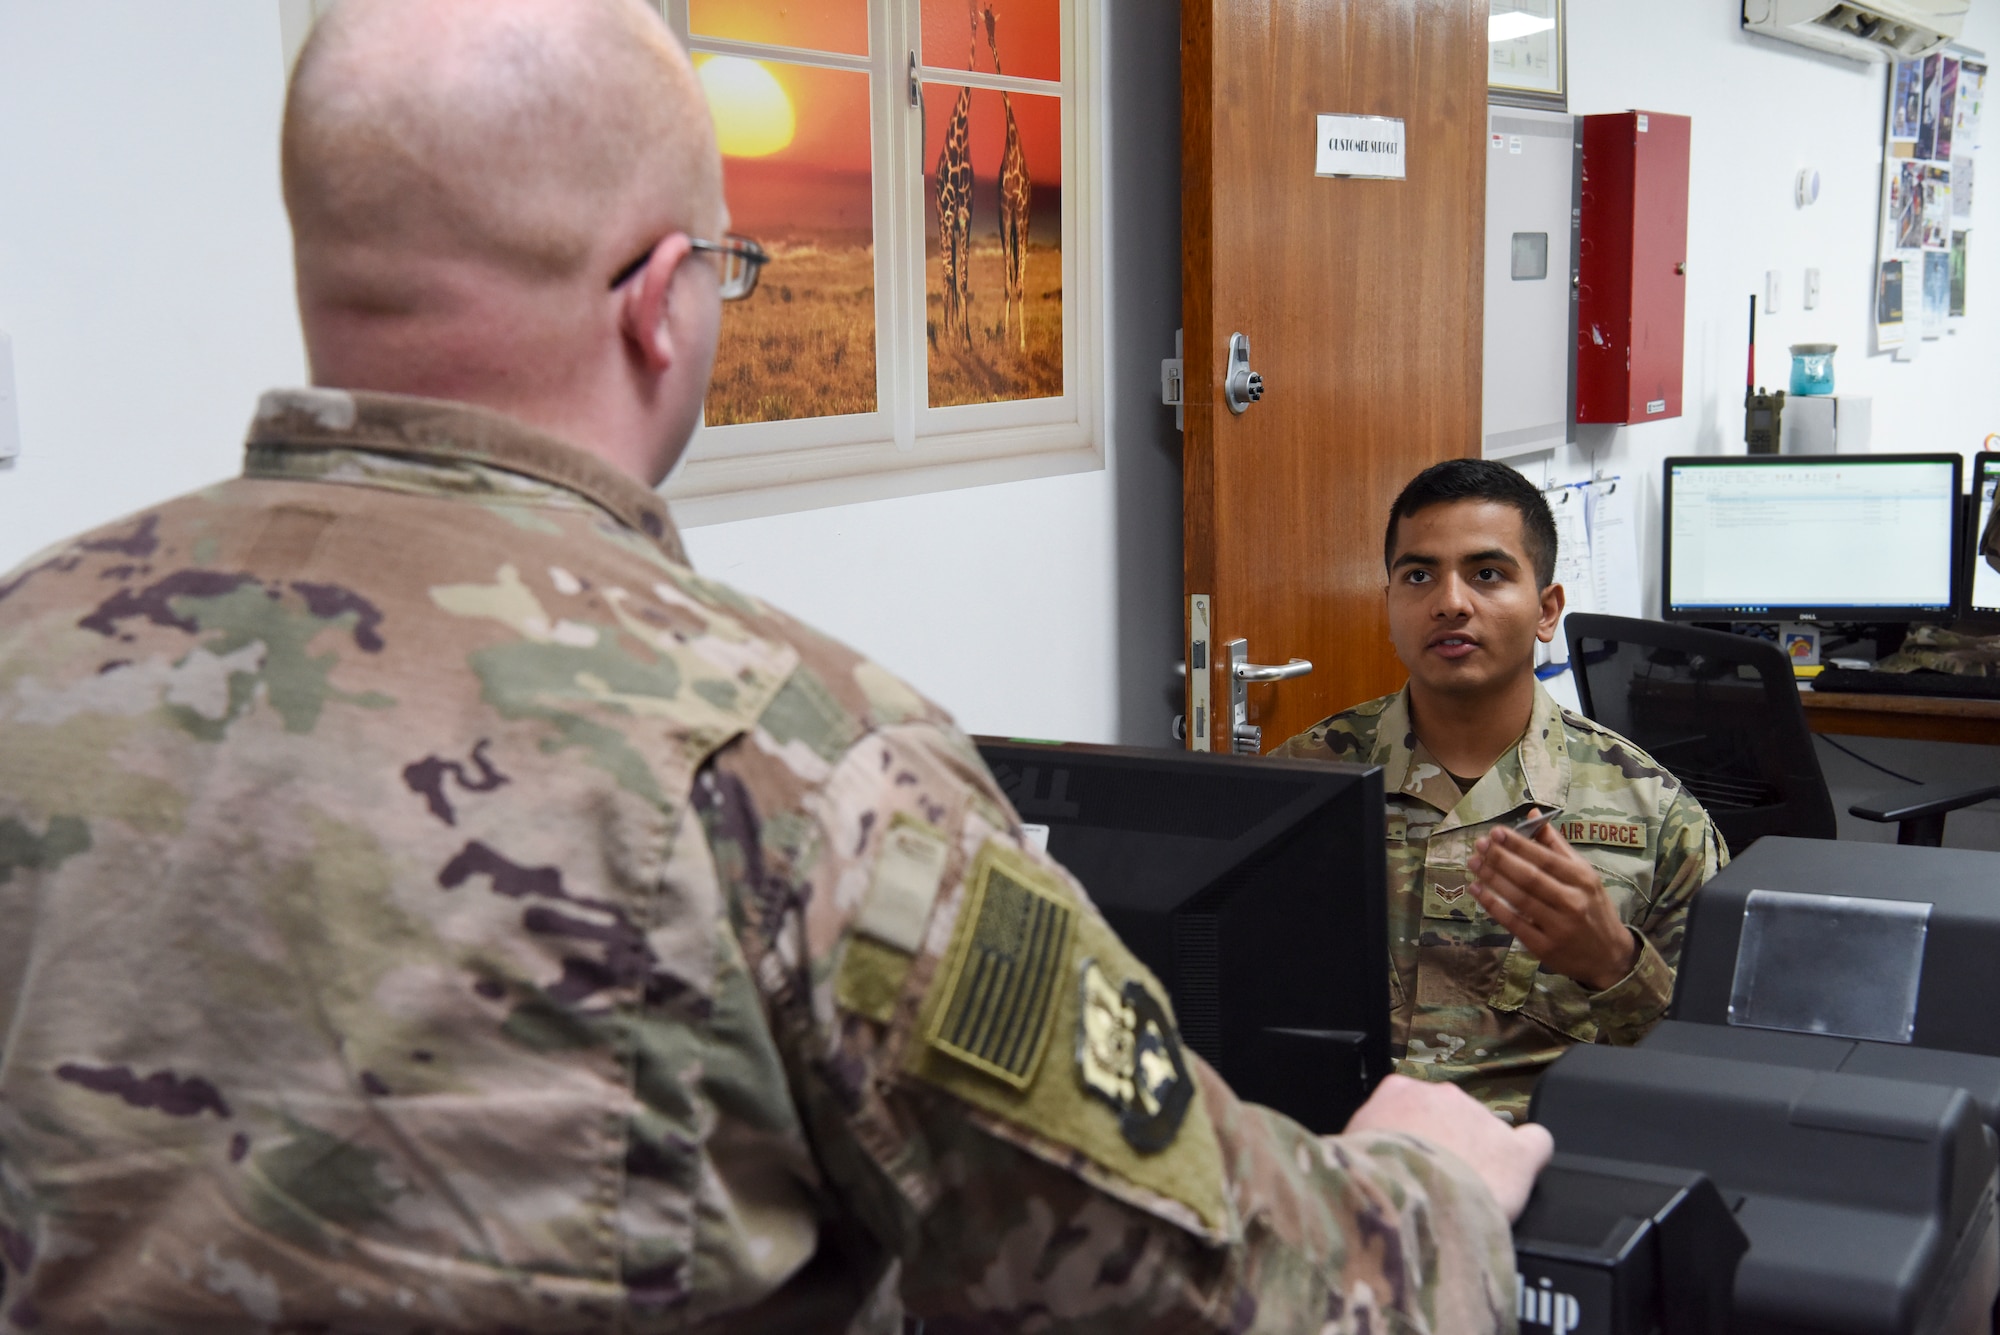 Airman 1st Class Anmol Adhikari, 380th Expeditionary Force Support Squadron PERSCO customer support technician, assists a customer with getting a new identification card Jan. 17, 2019 at Al Dhafra Air Base, United Arab Emirates.